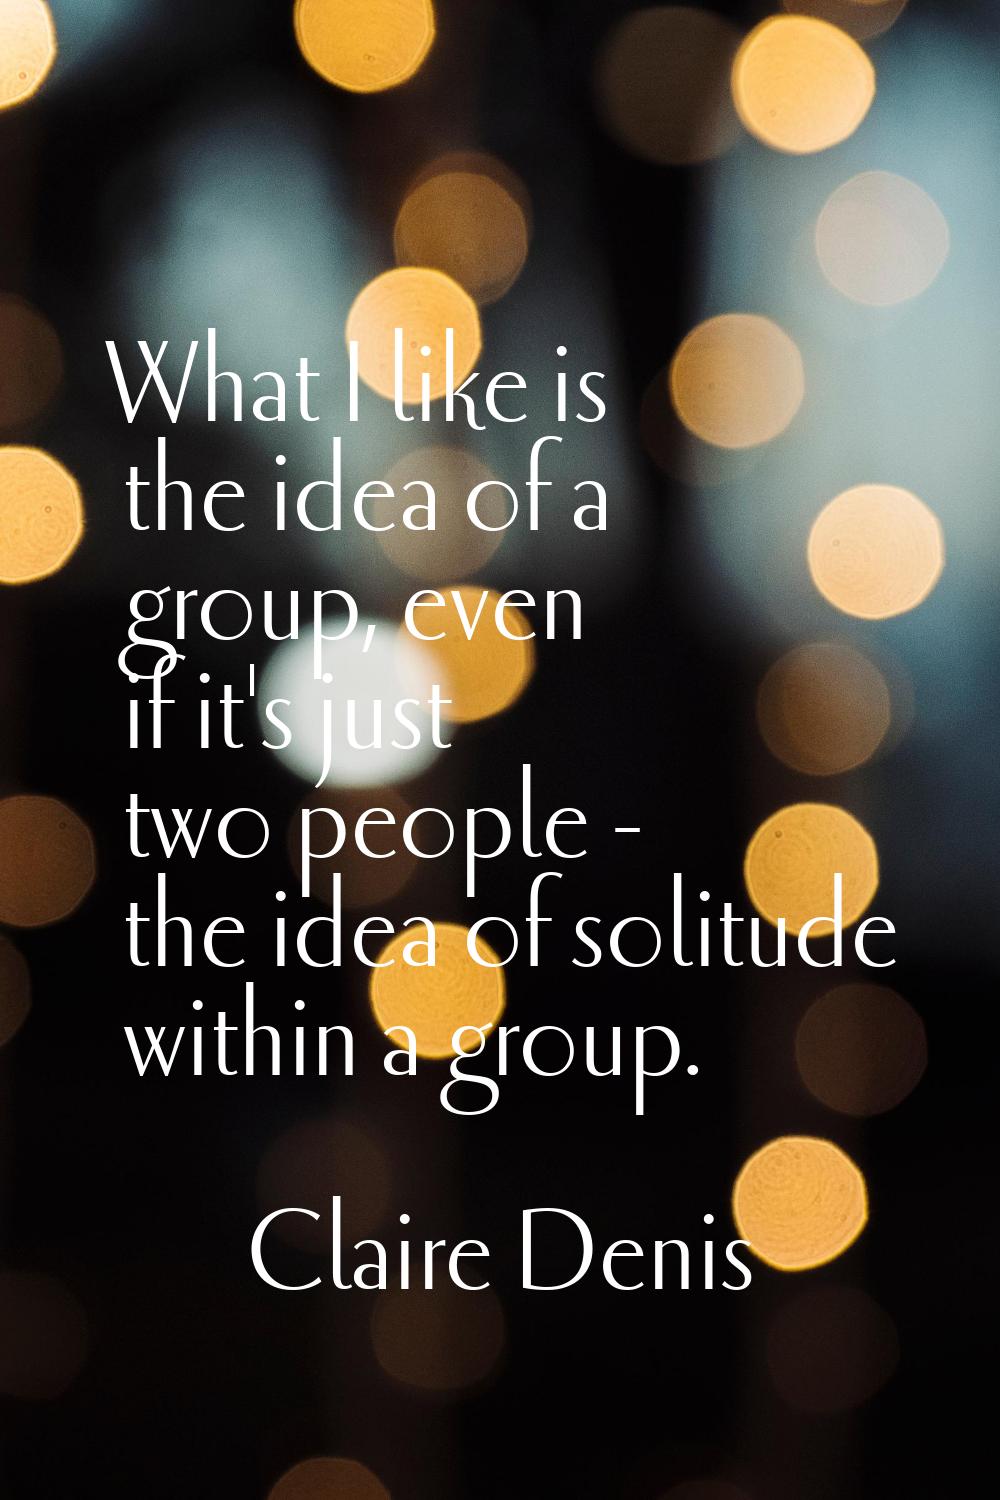 What I like is the idea of a group, even if it's just two people - the idea of solitude within a gr